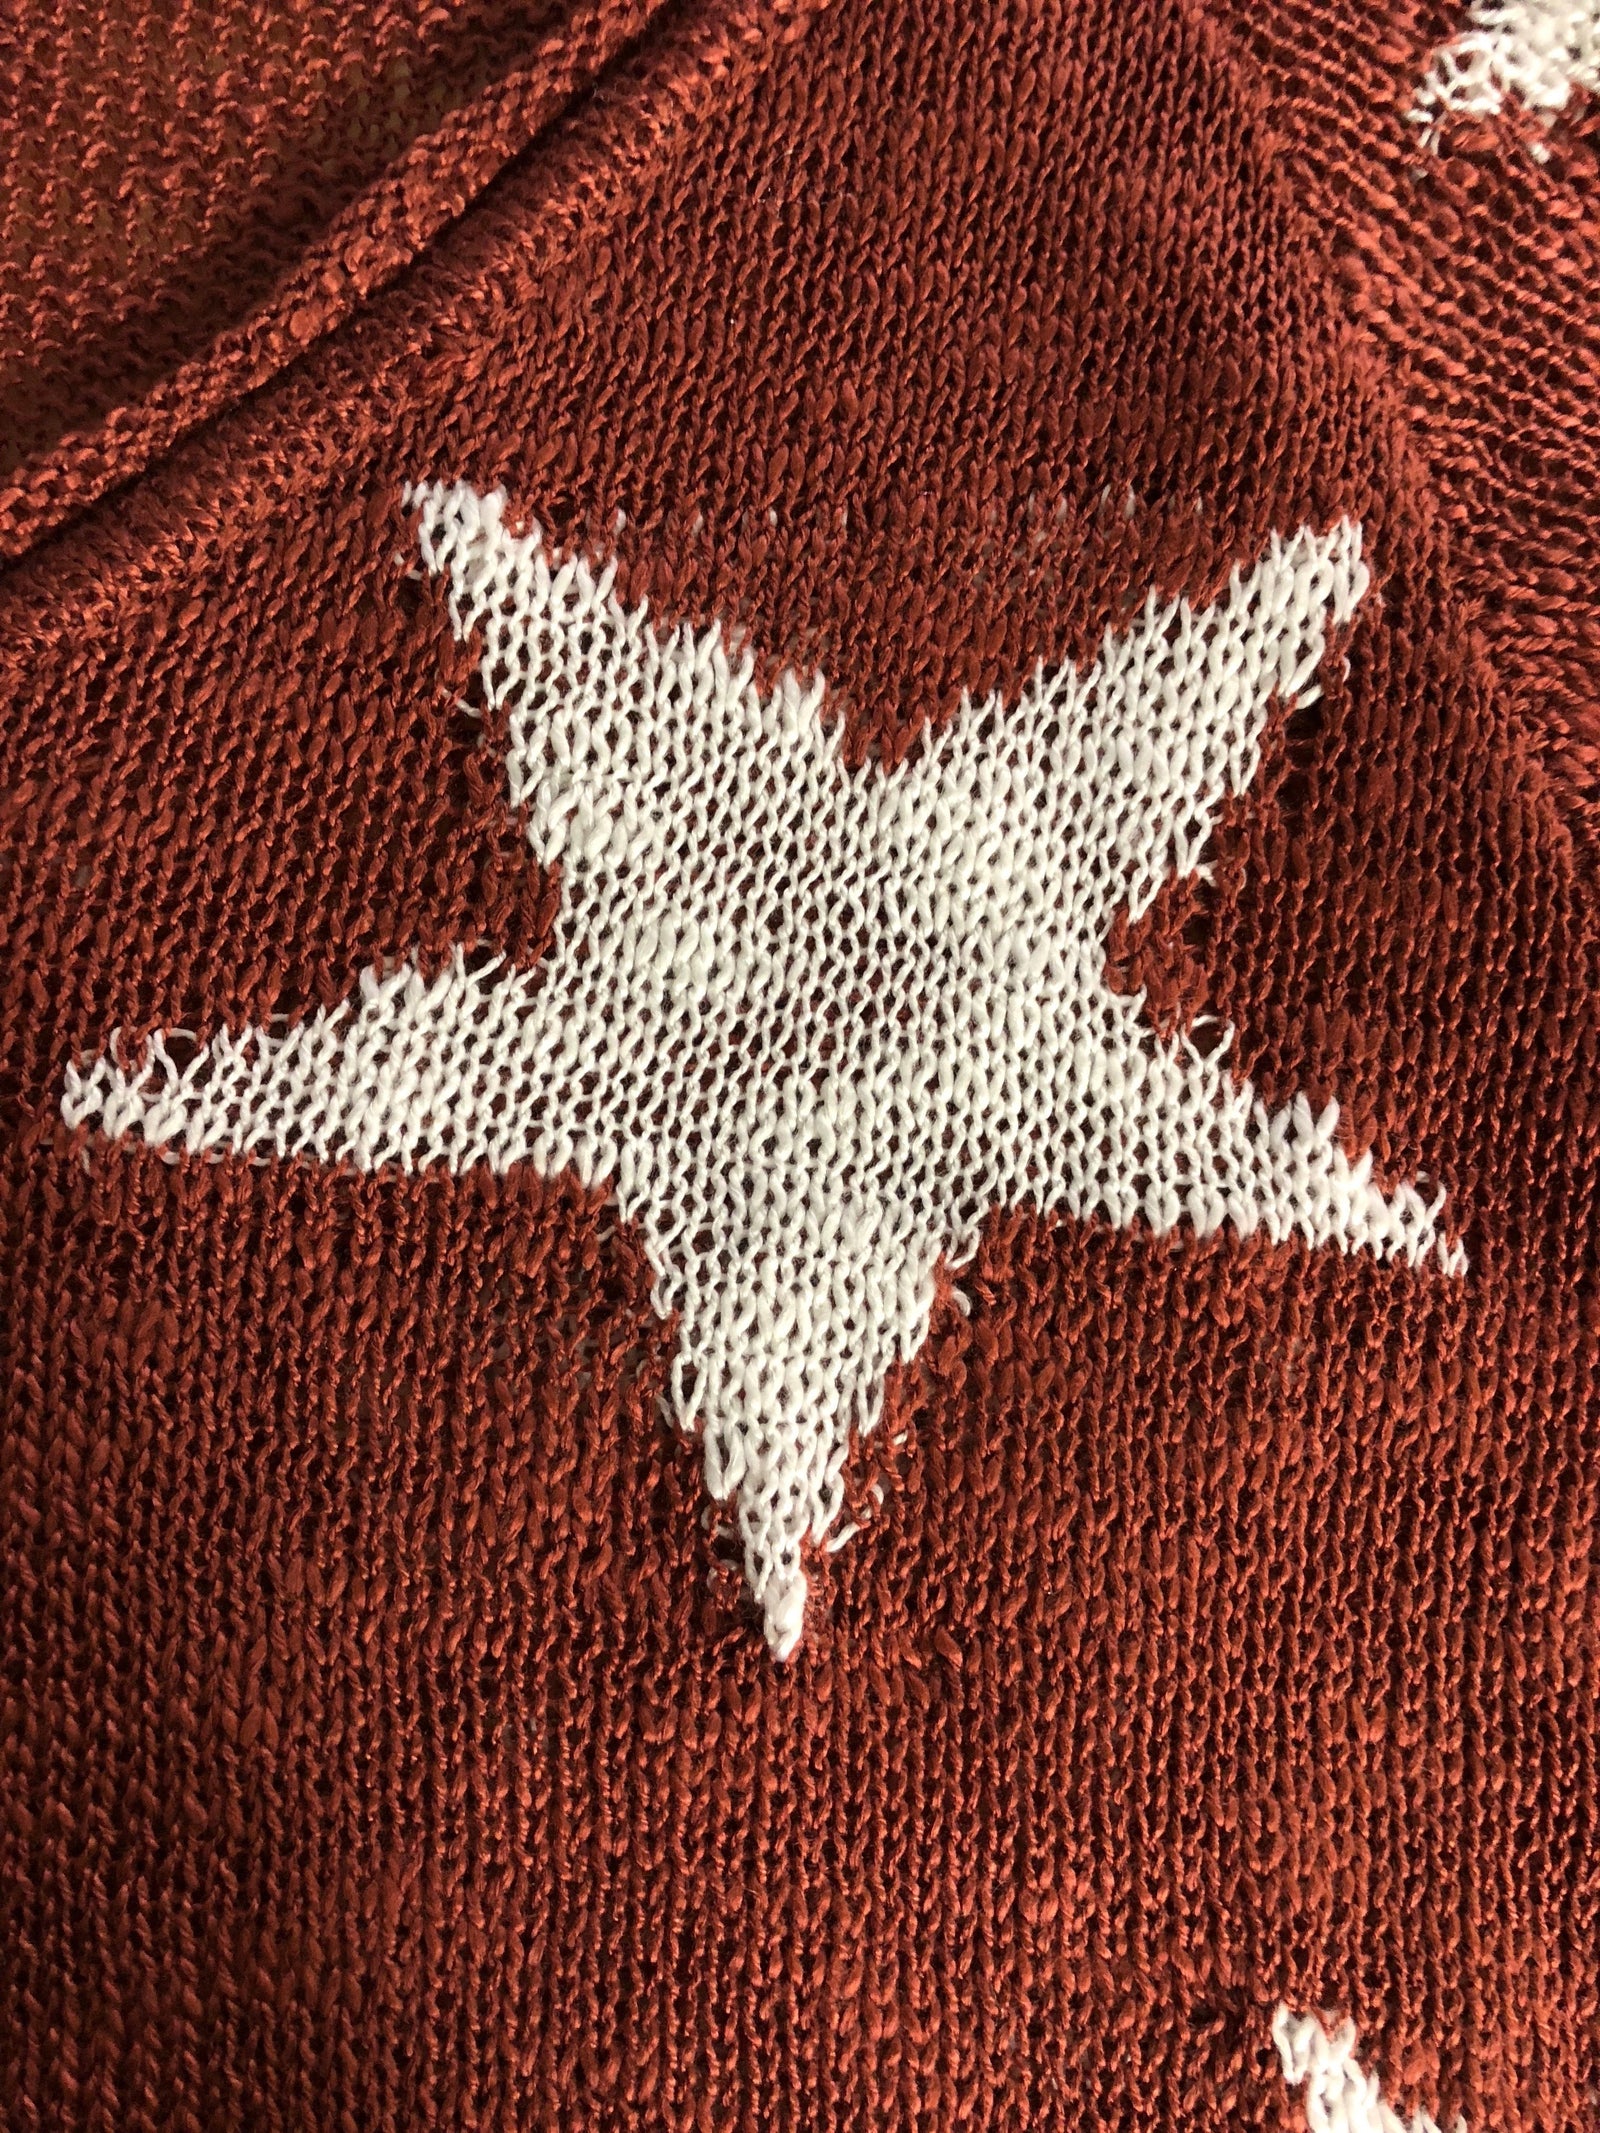 Perfect Timing Knitted Star Top- Burnt Orange